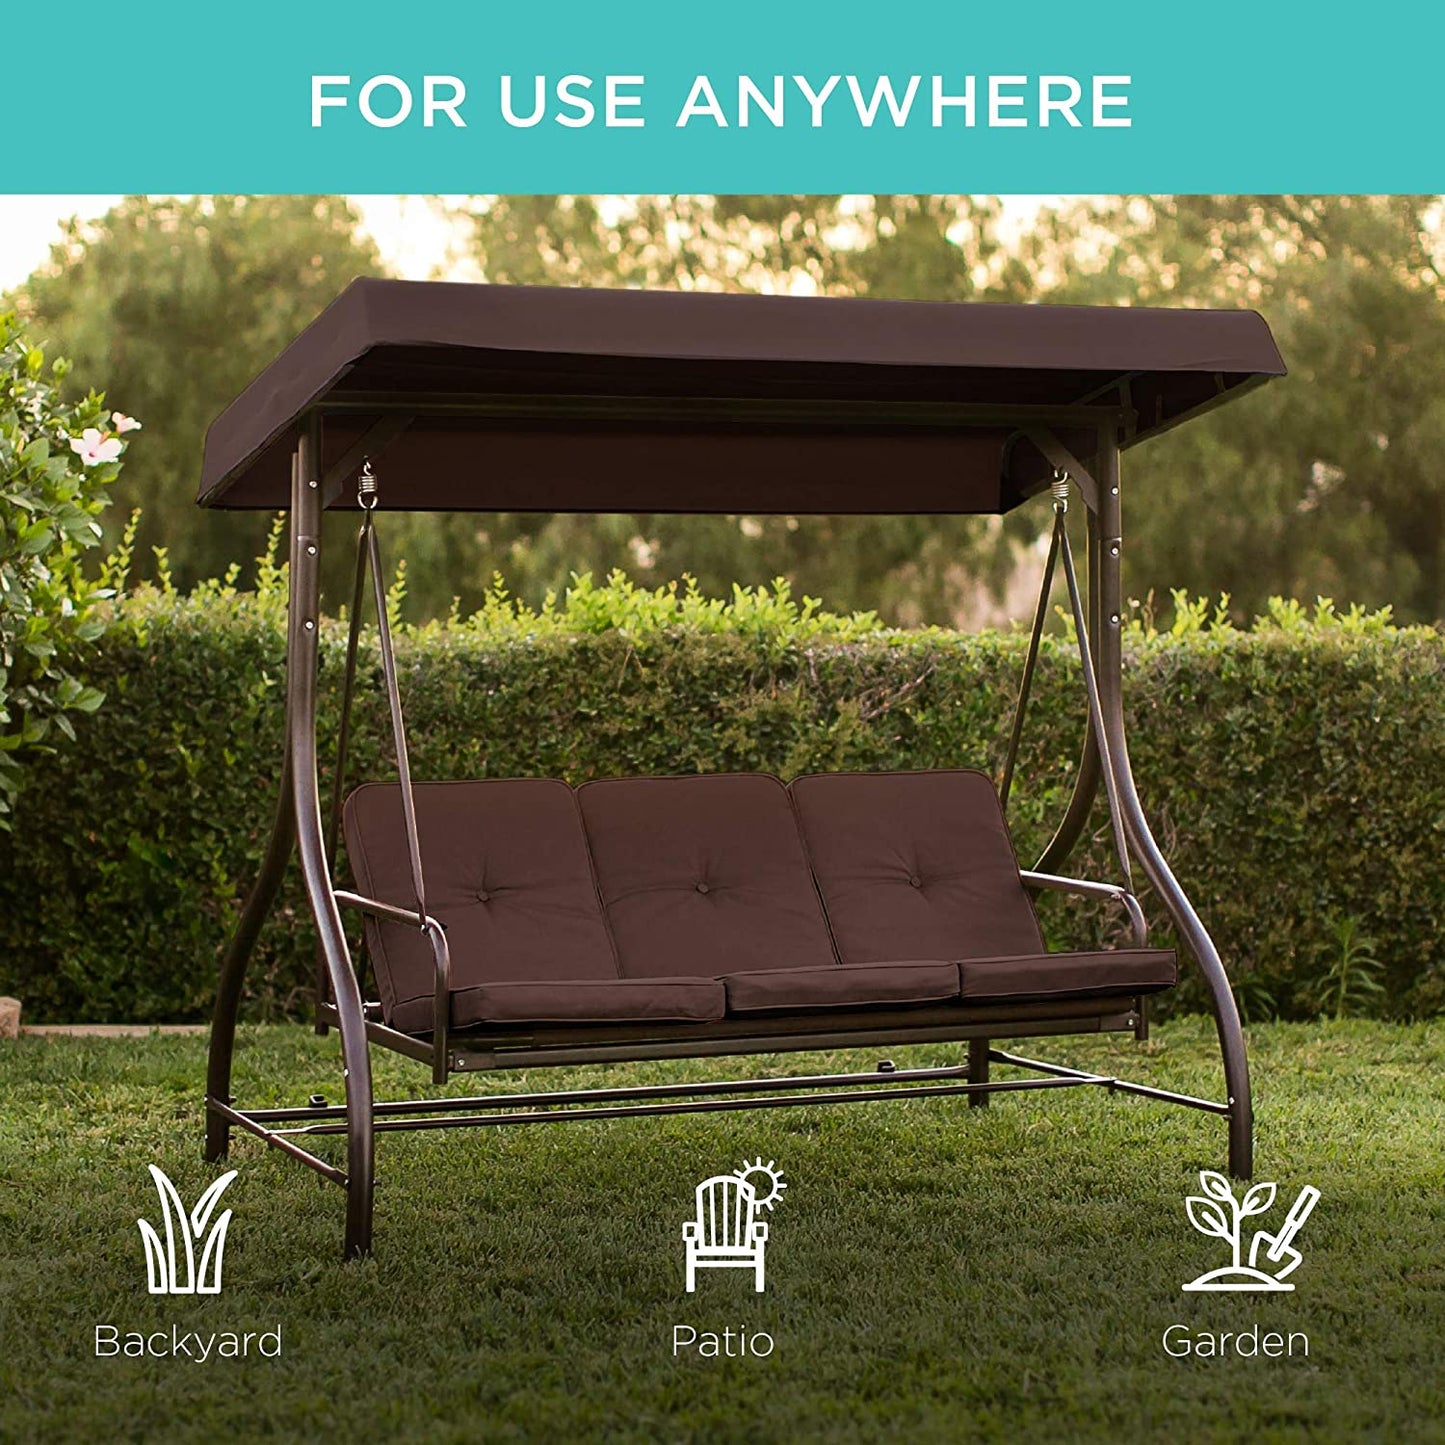 Patio Watcher 3-Seat Outdoor Large Converting Canopy Swing Glider, Patio Hammock Lounge Chair for Porch Backyard Adjustable Shade, Removable Cushions